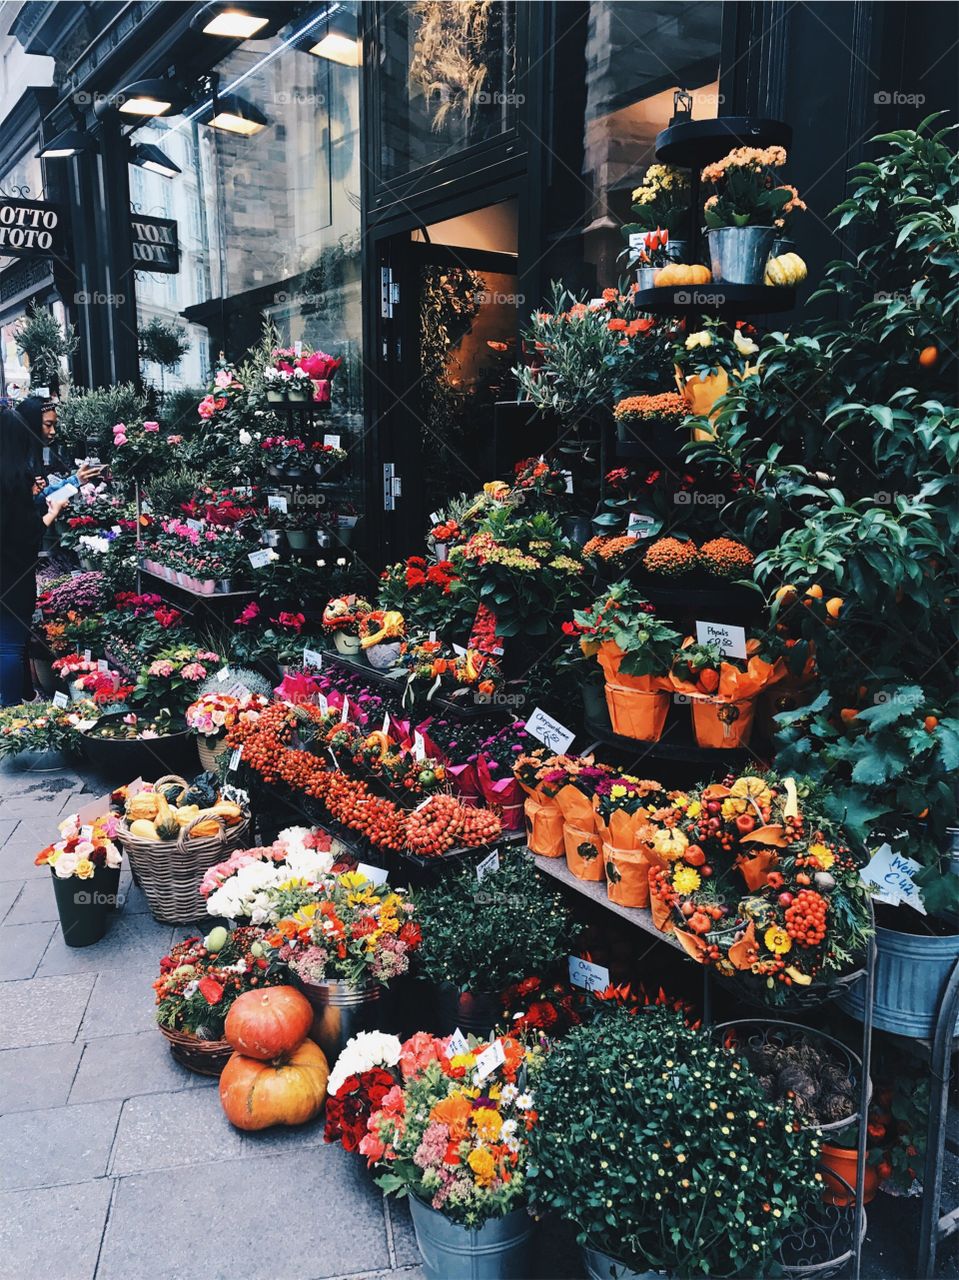 Such a beautiful flowers shop in Vienna 